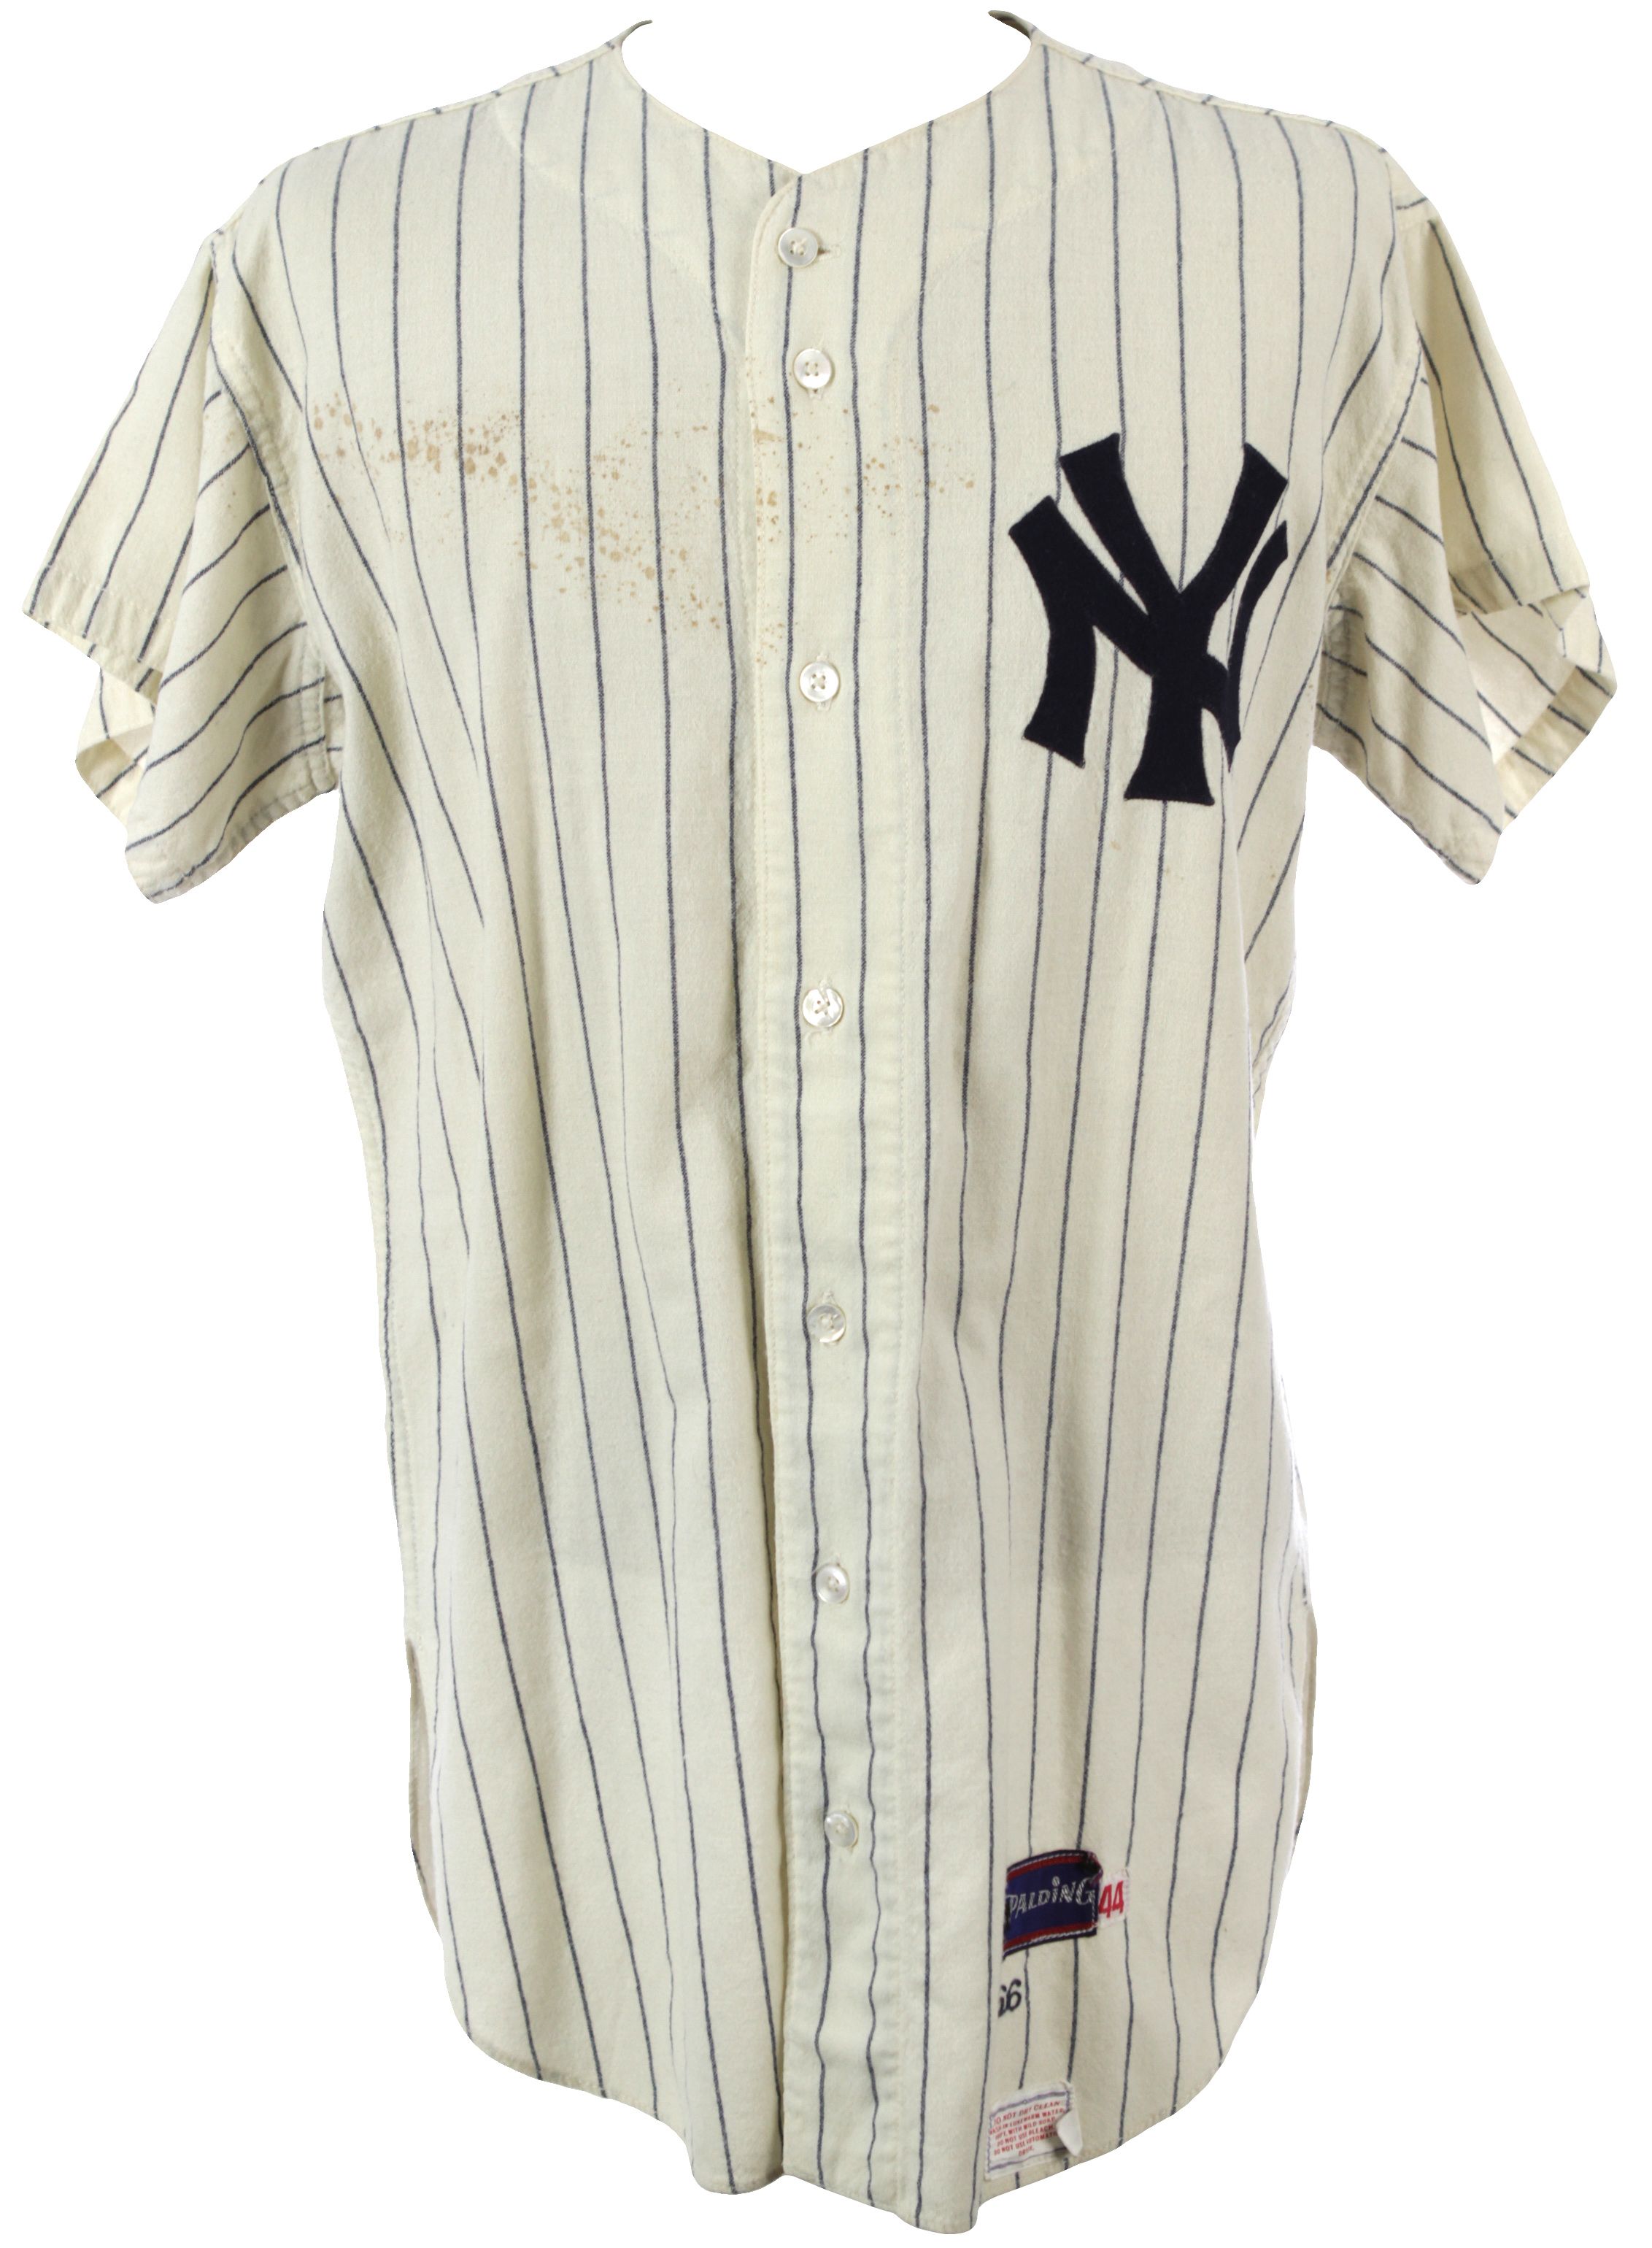 Sold at Auction: New York Yankees 1923-2008 Commemorative Jersey